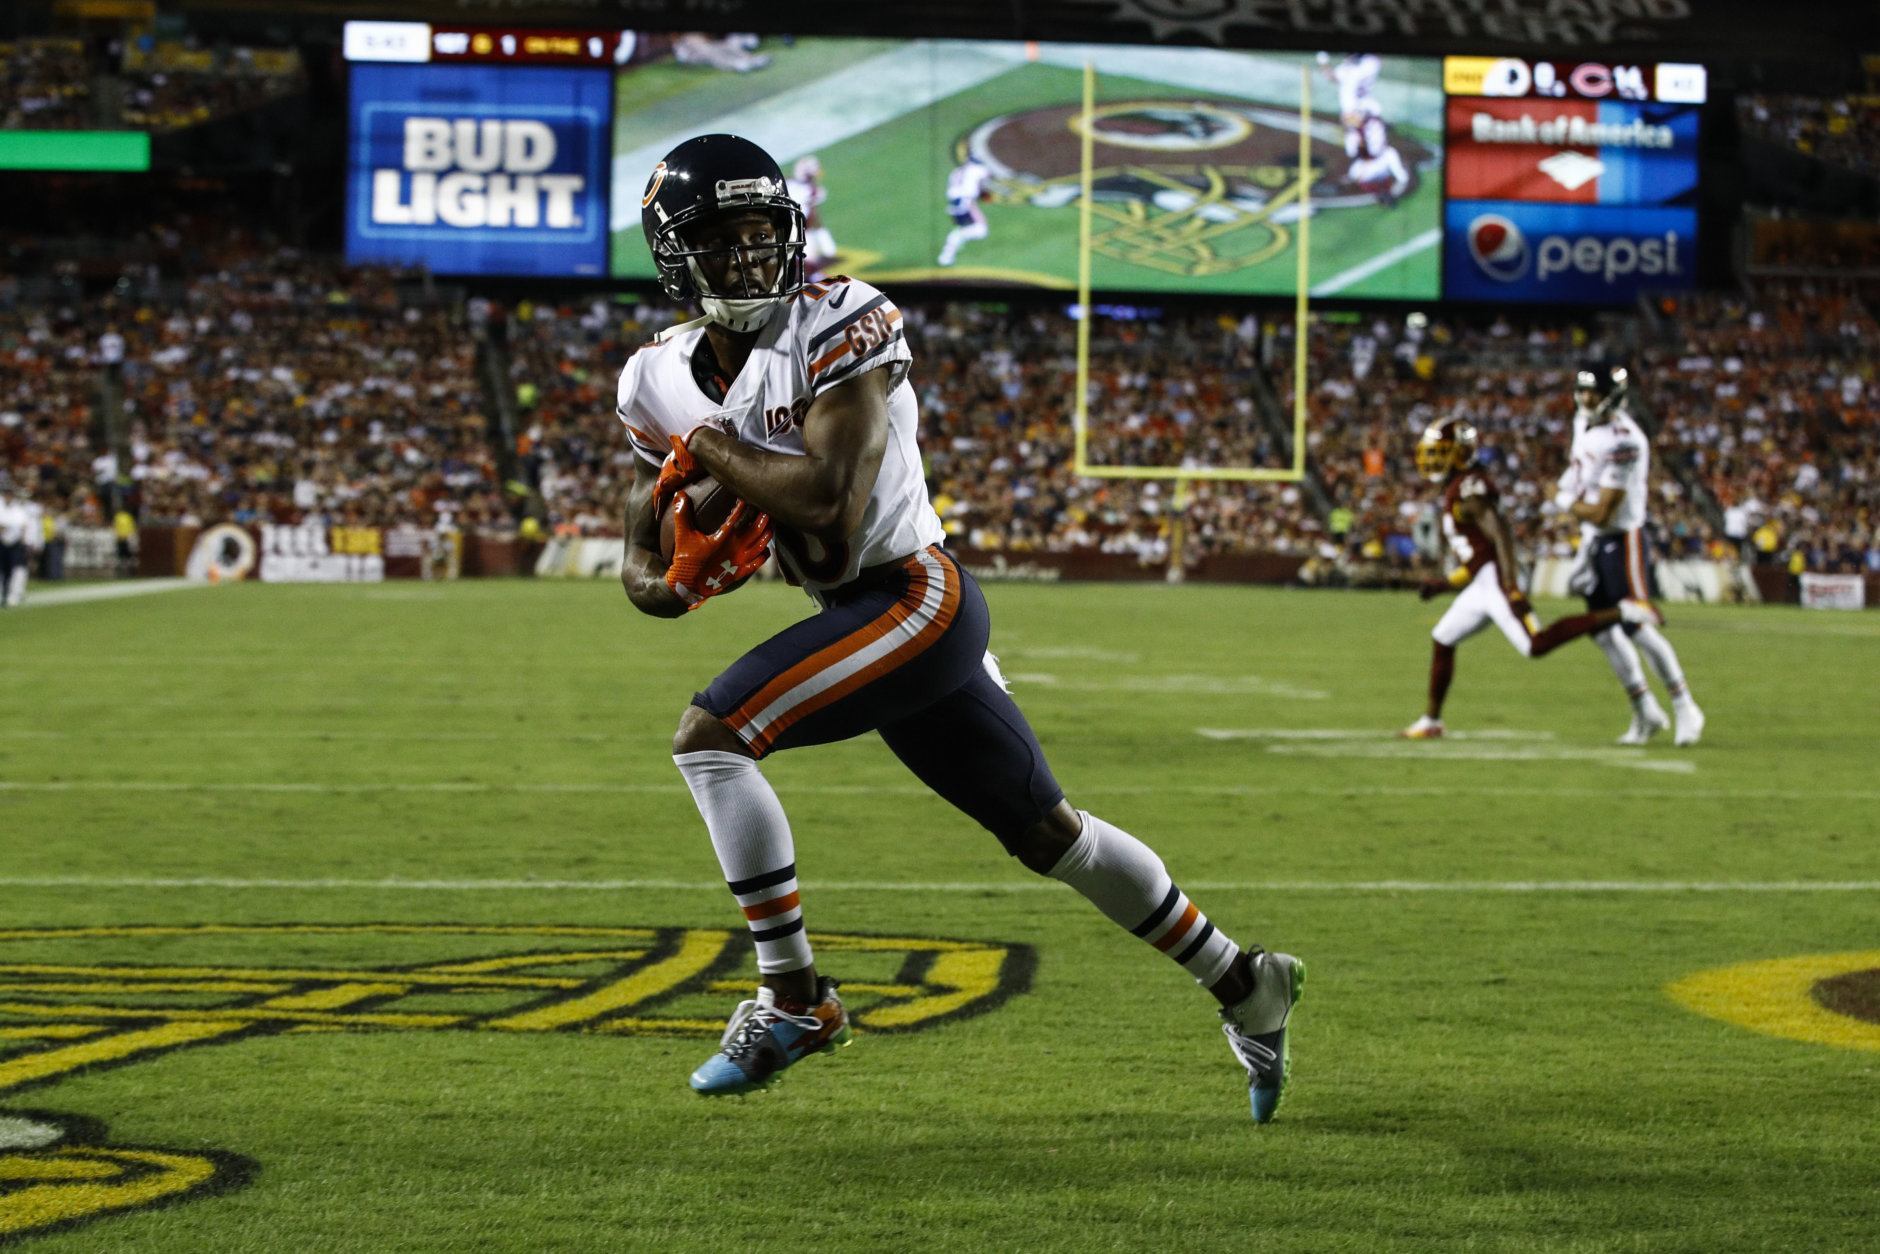 Chicago Bears wide receiver Taylor Gabriel (18) runs with his touchdown pass during the first half of an NFL football game against the Washington Redskins, Monday, Sept. 23, 2019, in Landover, Md. (AP Photo/Patrick Semansky)